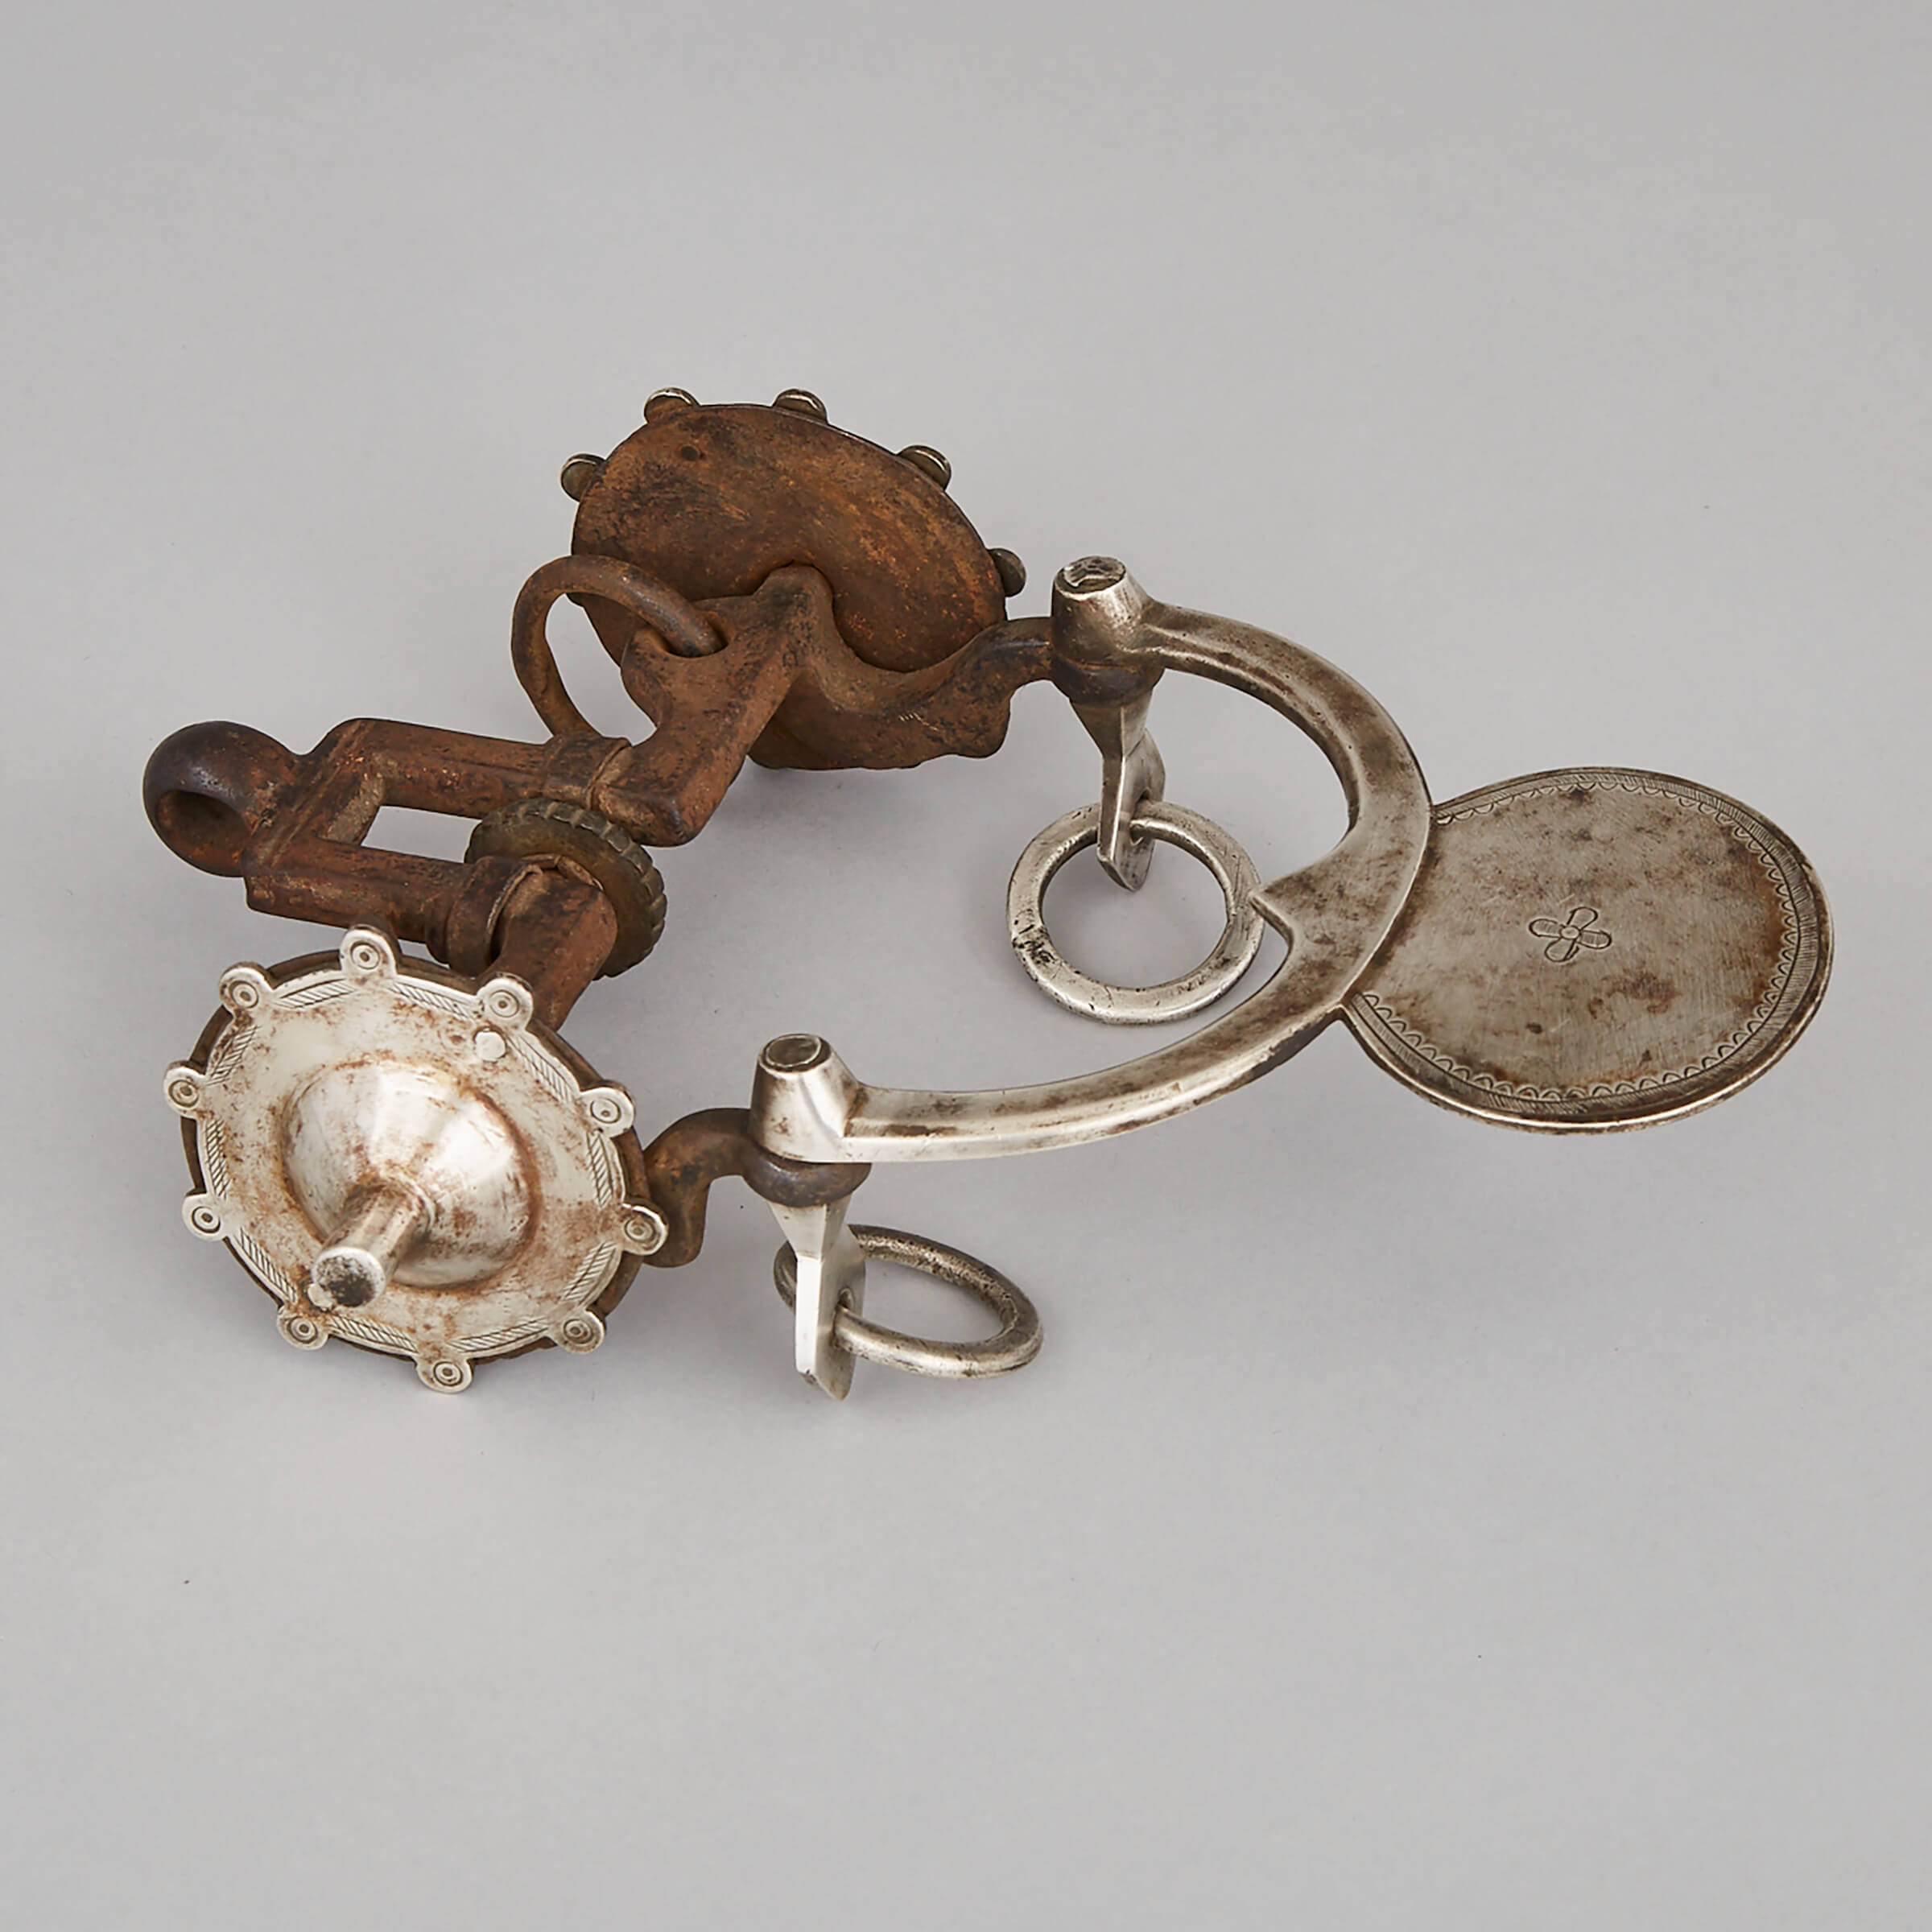 Mexican Charro’s Iron and Nickel Silver Horse Bit, 19th century